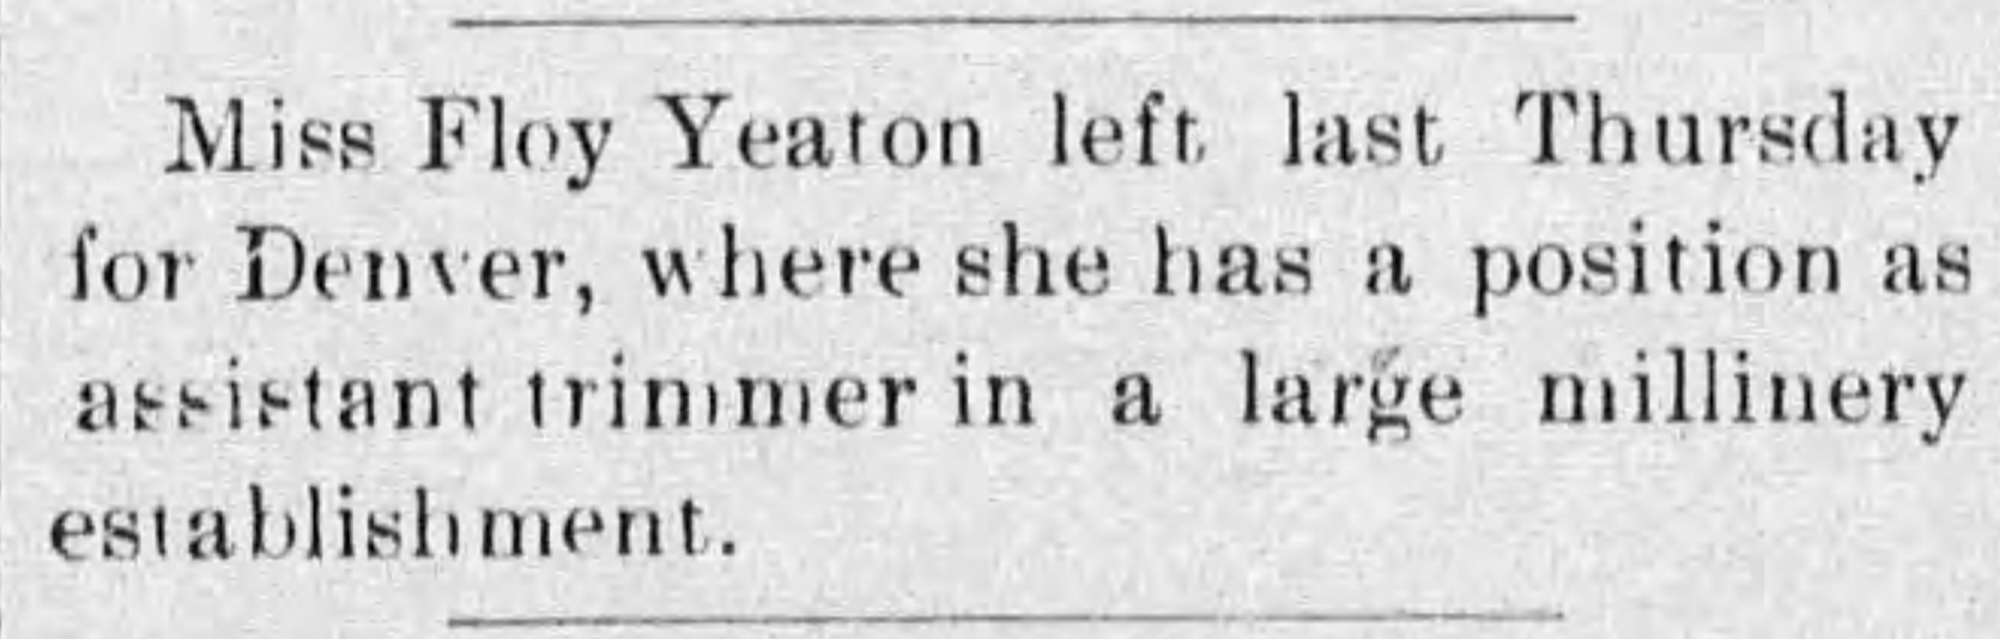 Dauth Family Archive - 1899-03-22 - The Lyons Weekly - Florence Yeaton Working at Denver Millinery